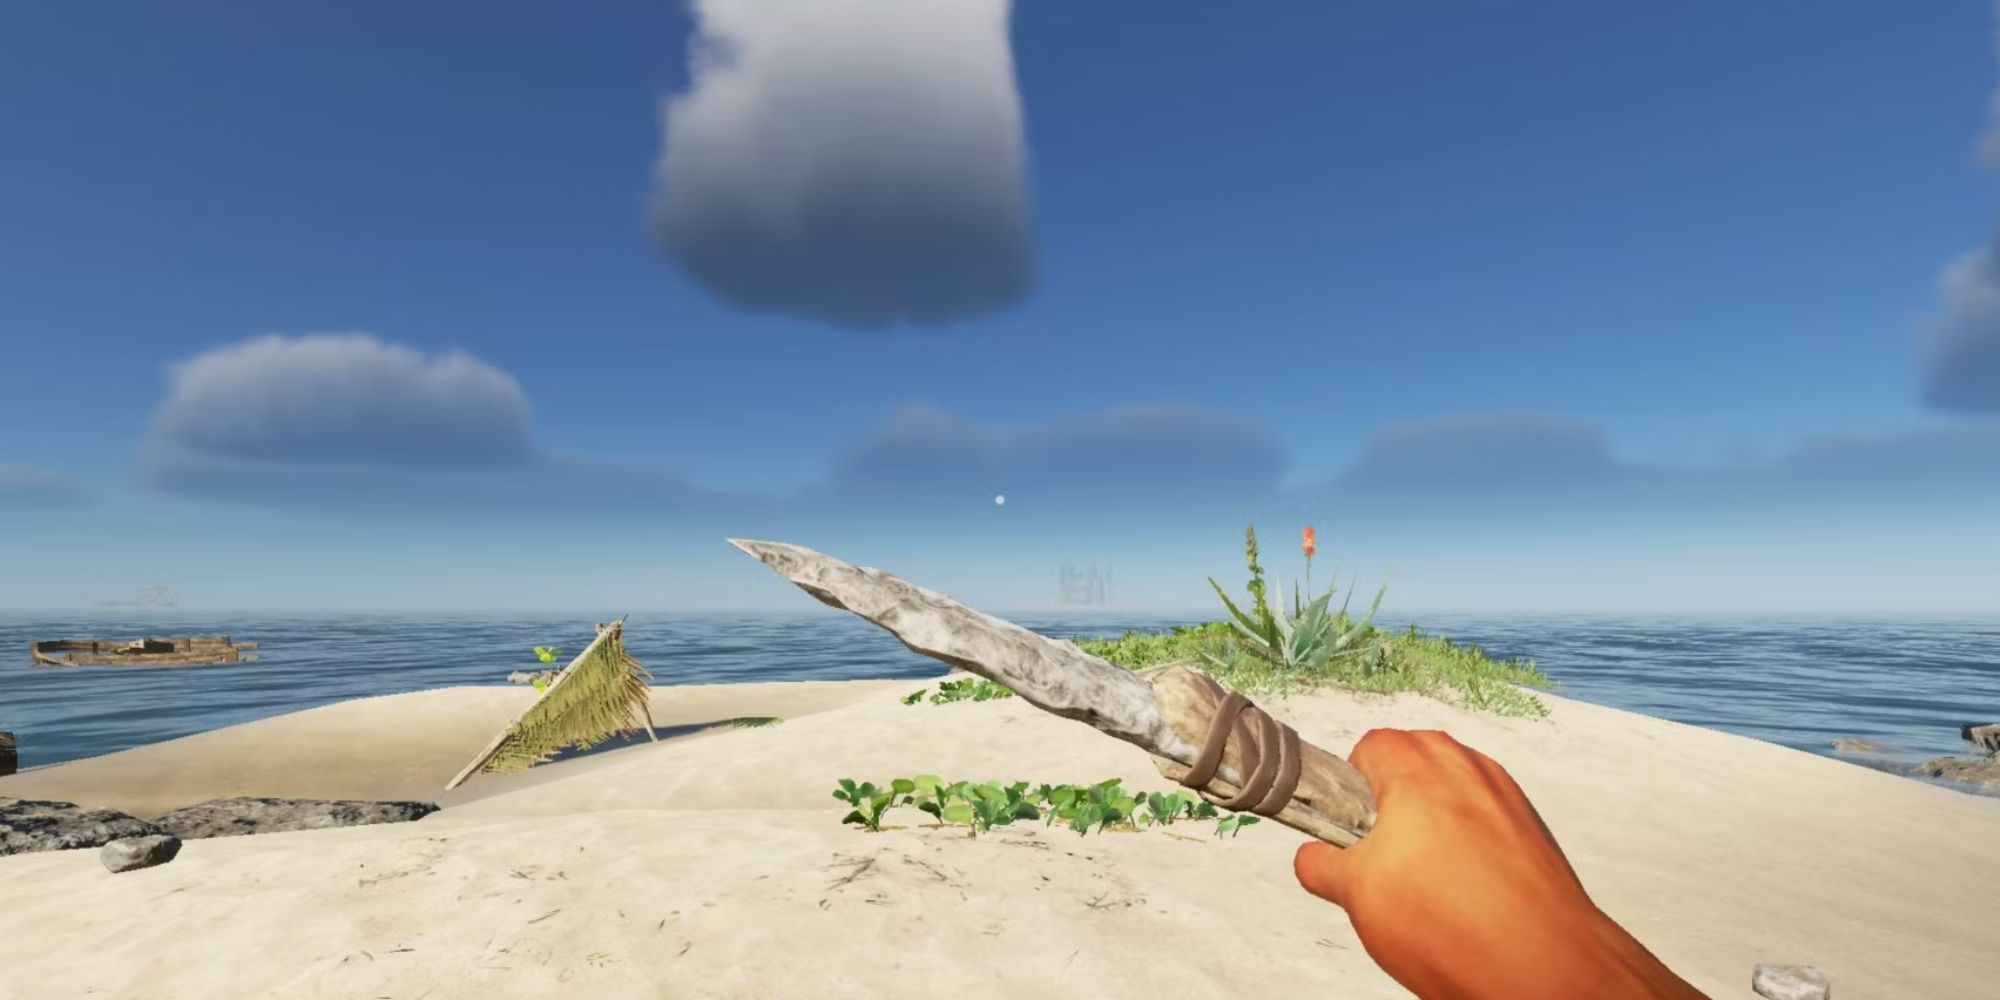 Stranded Deep - Knife in hand at the beach